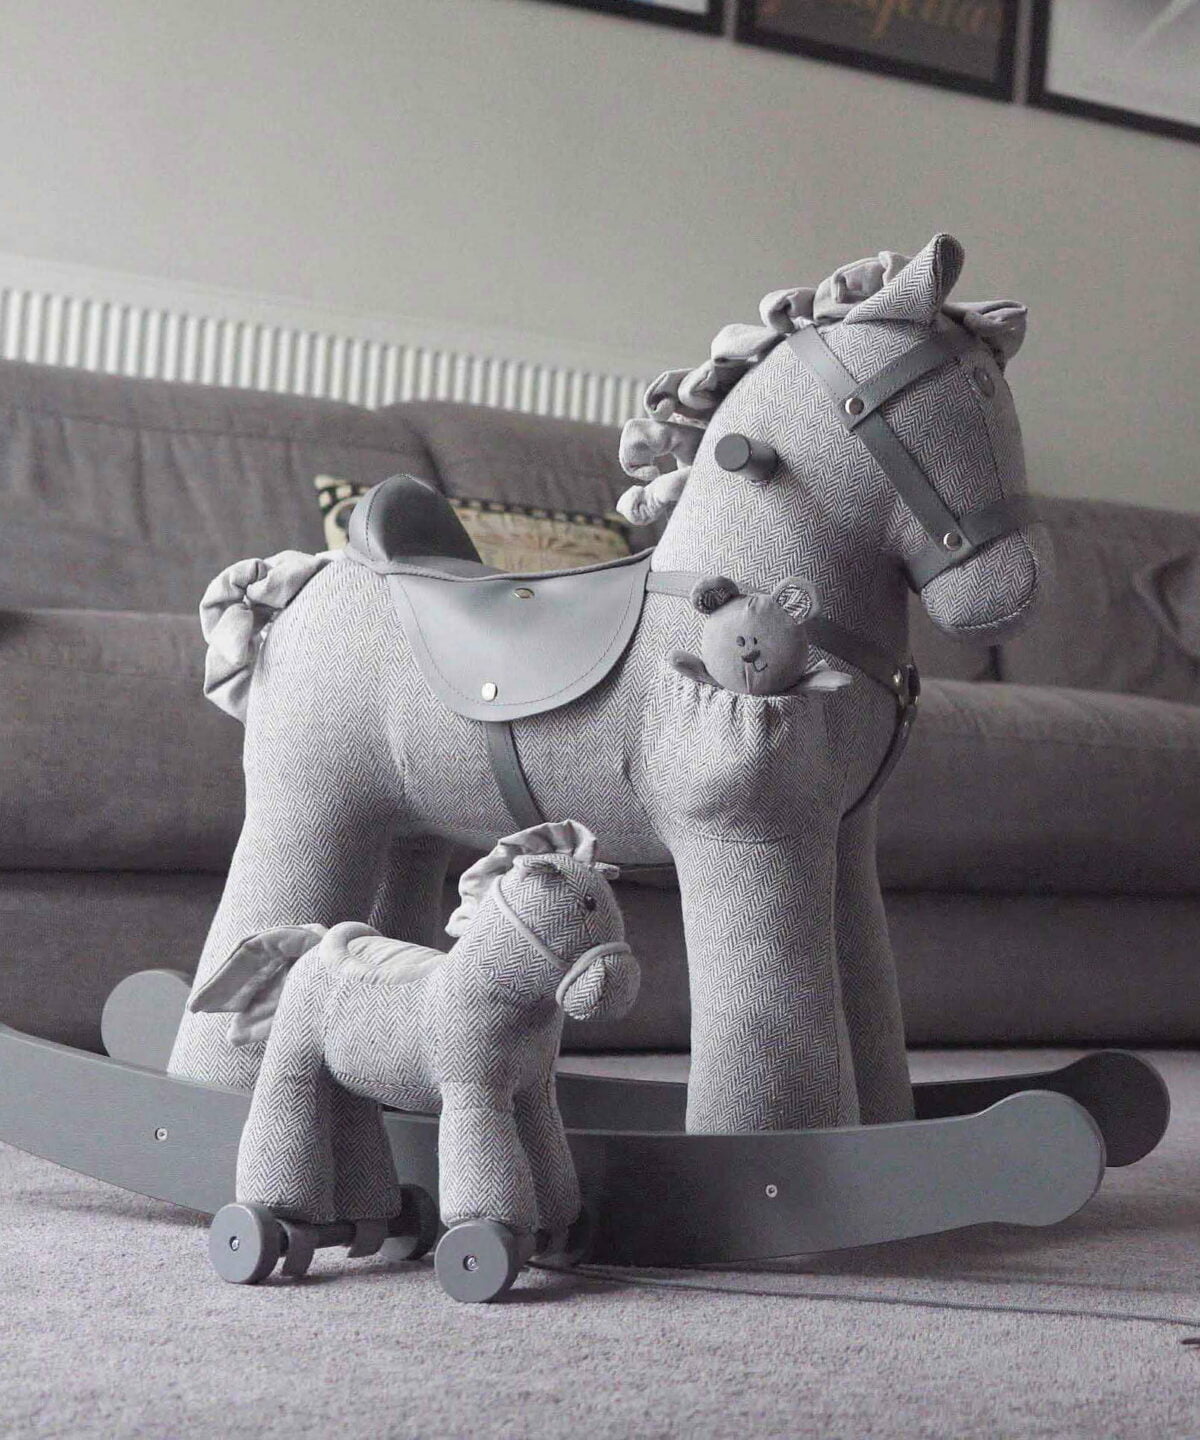 Stirling Rocking horse and Stirling Horse Pull Along Toy